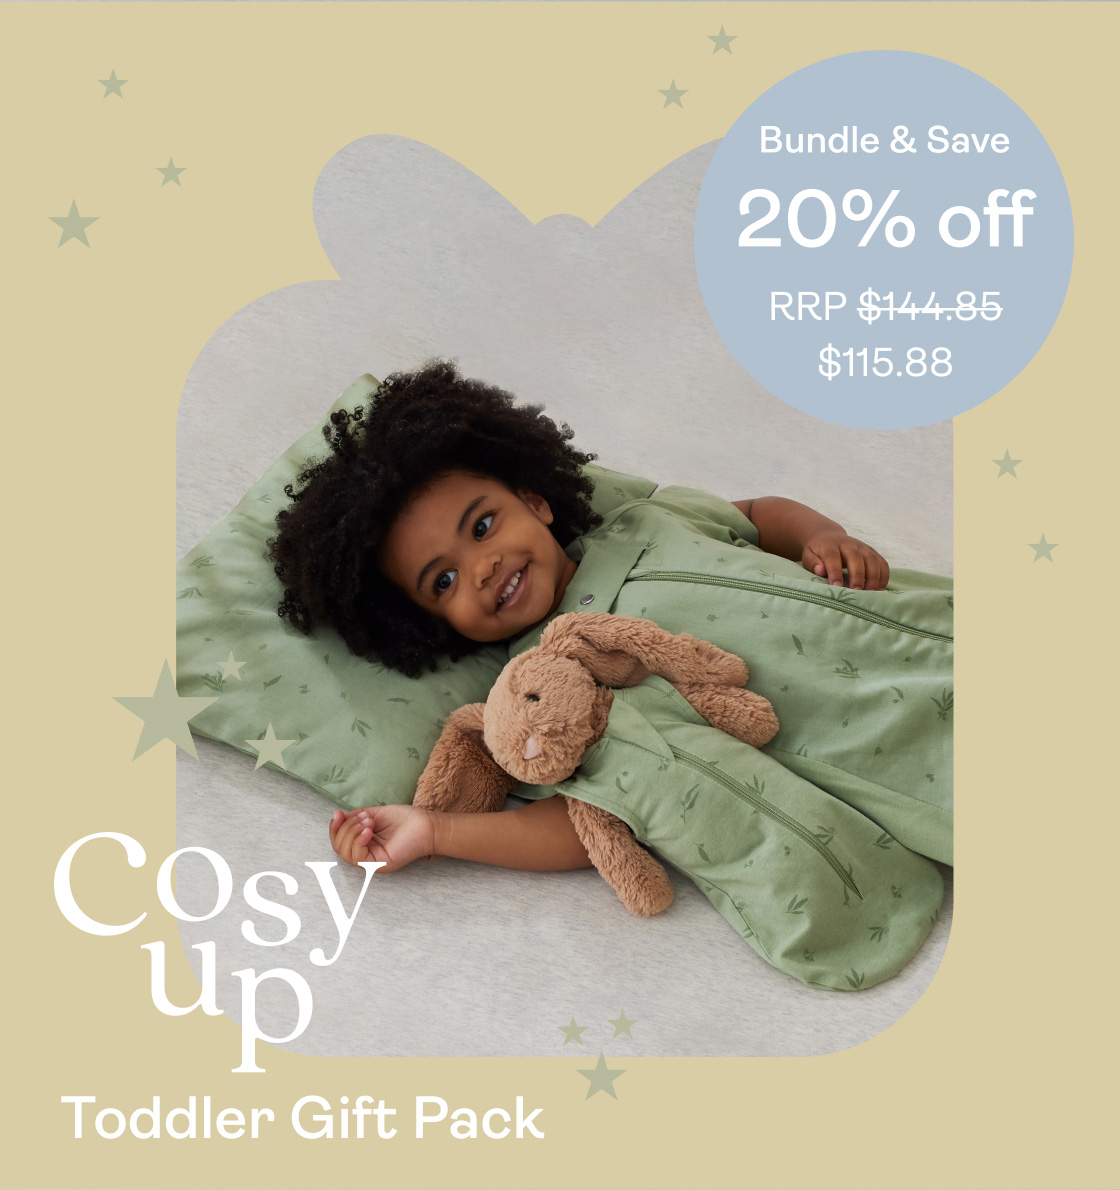 Cosy Up Toddler Bundle Gift Pack with Sleep Suit Bag, Toddler Pillow & Doll Sleeping Bag